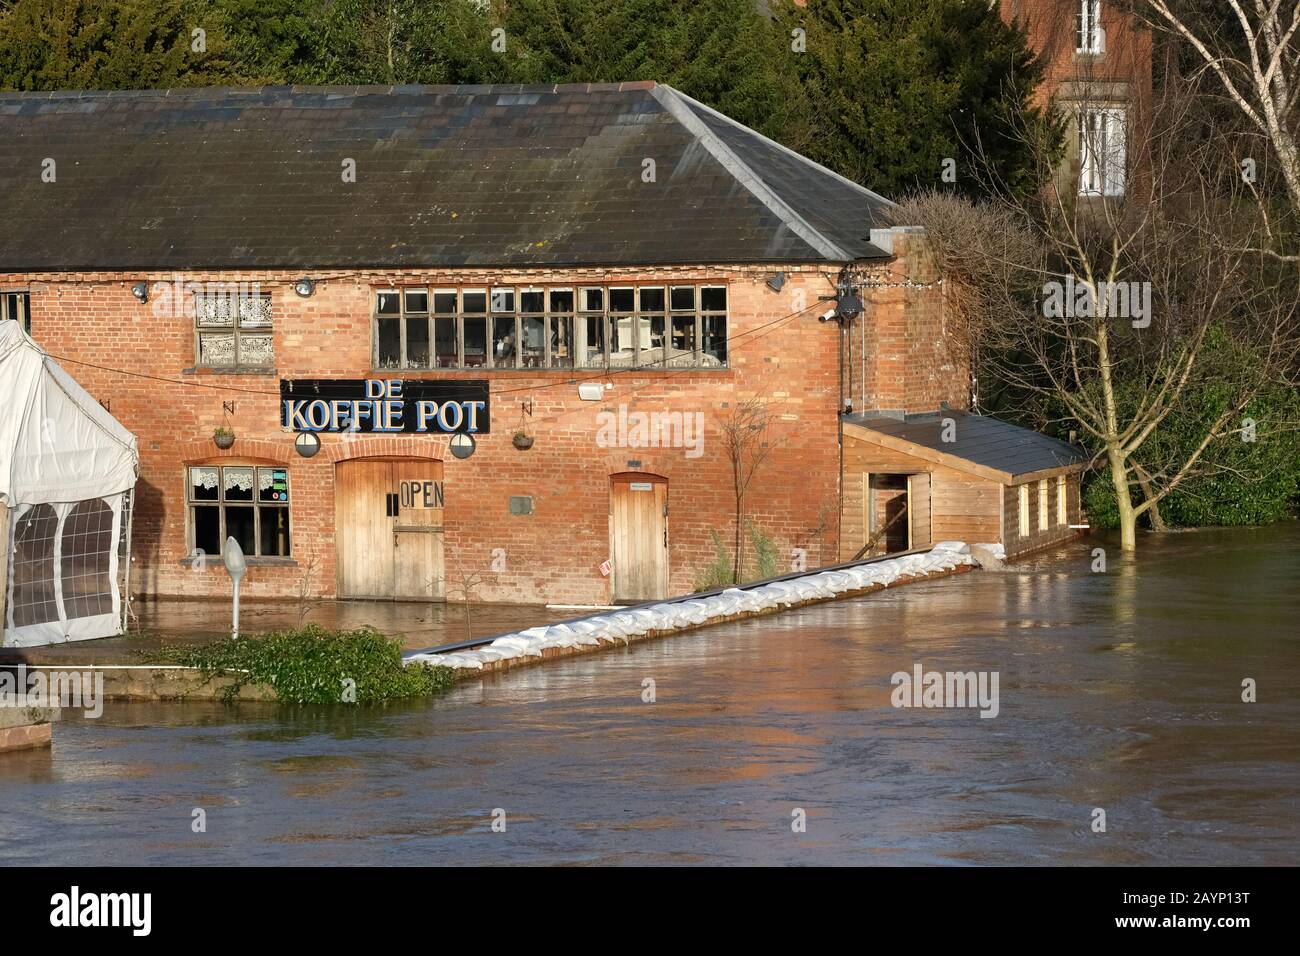 Hereford, Herefordshire, UK - Sunday 16th February 2020 - The Koffie Pot pub stands right next to the River Wye. The sand bags on their boundary wall may not be sufficient as the the River Wye continues to rise and is expected to peak during the early hours of Monday morning after severe rainfall across Herefordshire and Wales. Photo Steven May / Alamy Live News Stock Photo